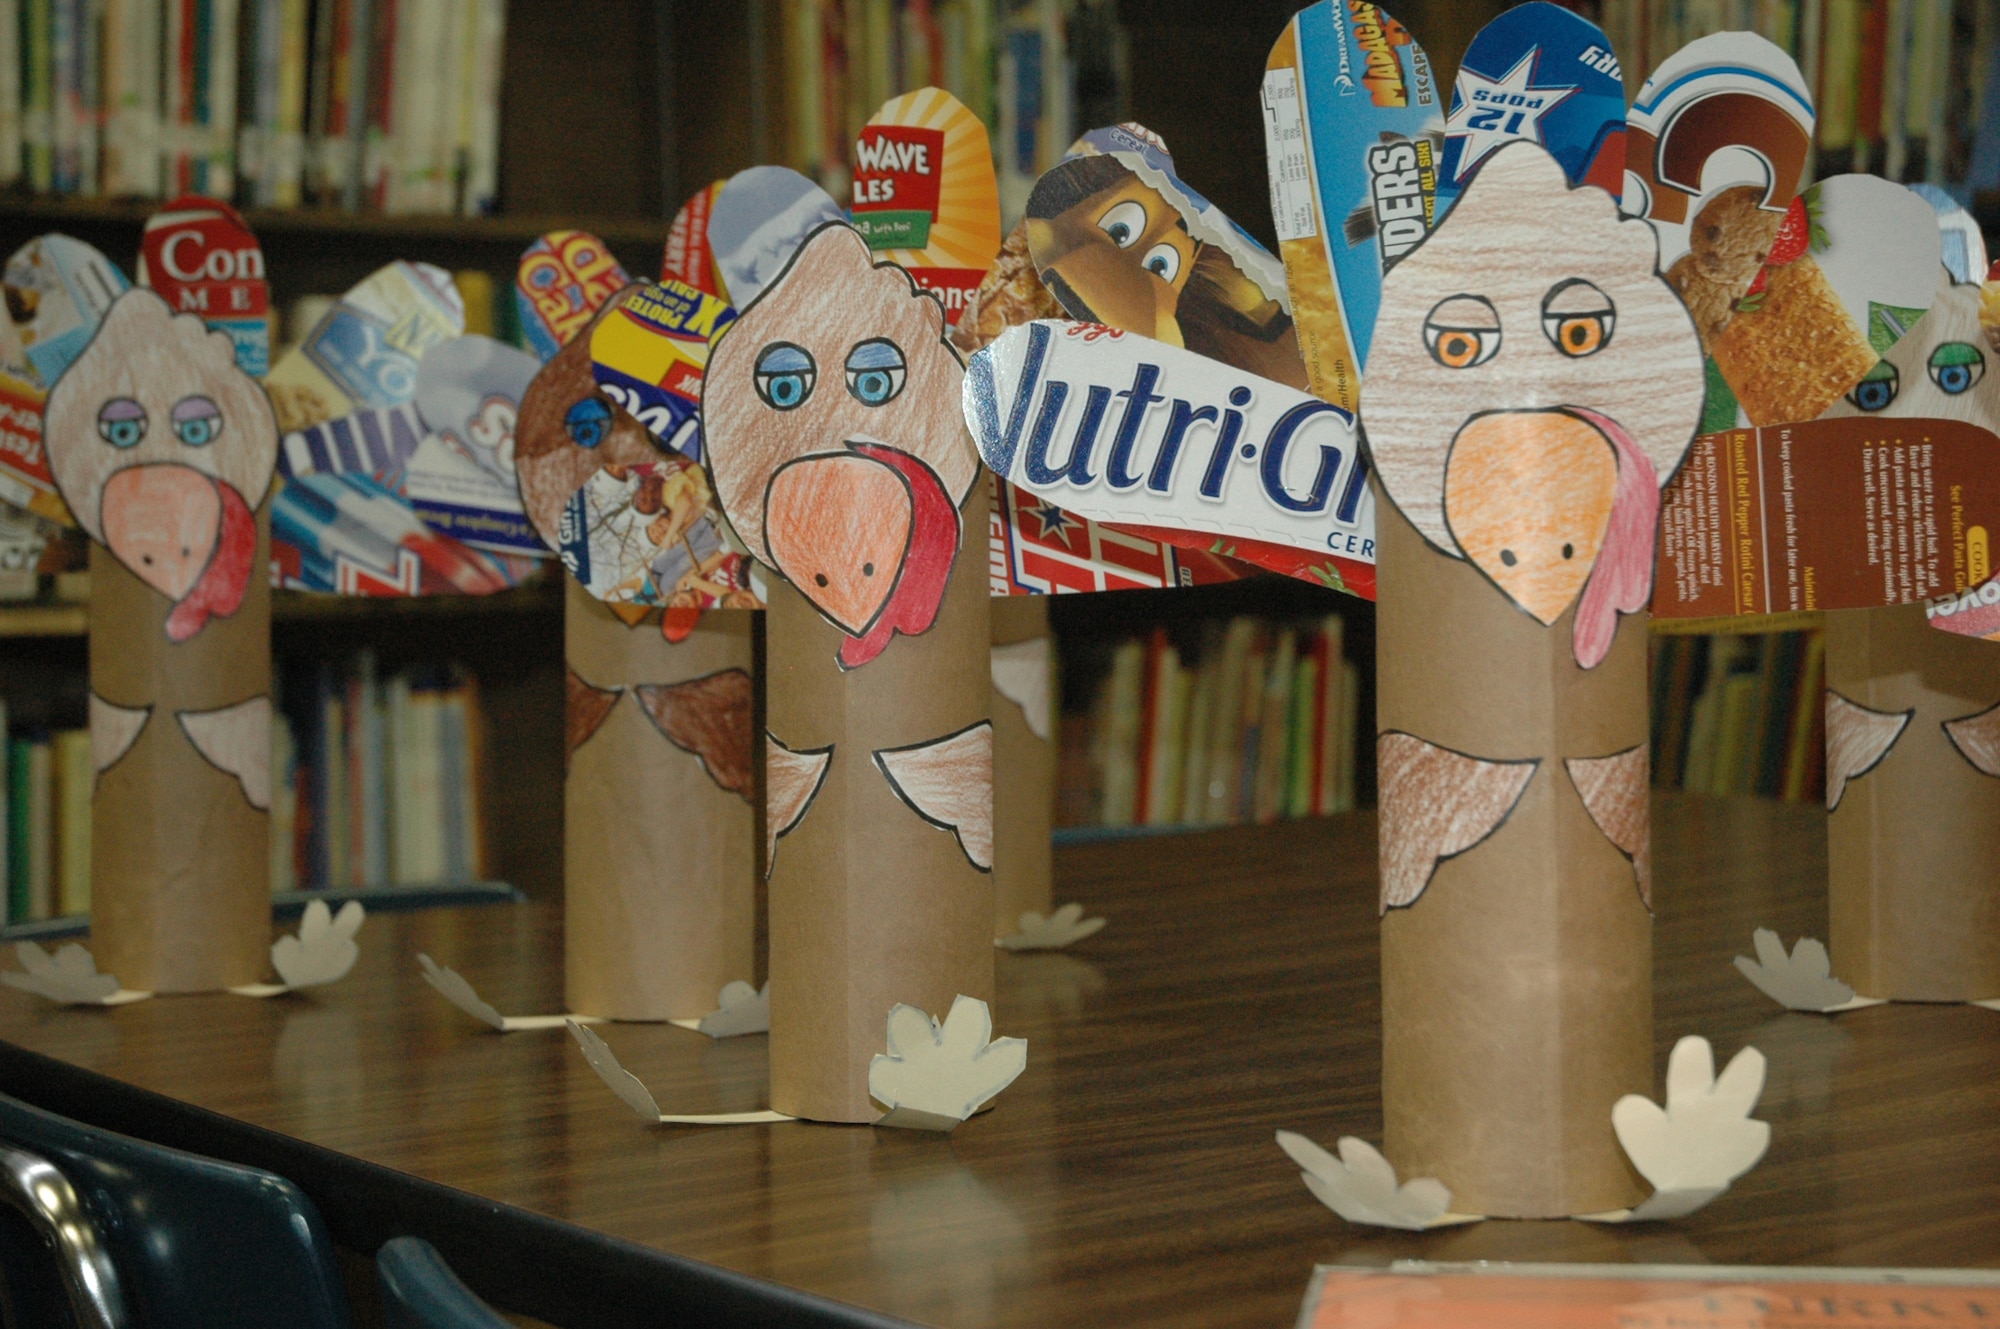 Tyndall Elementary School third graders made their "recycled" turkeys out of pringle cans, extra worksheets, old file folders and grocery boxes.  (U.S. Air Force photo by Airman 1st Class Anthony J. Hyatt)